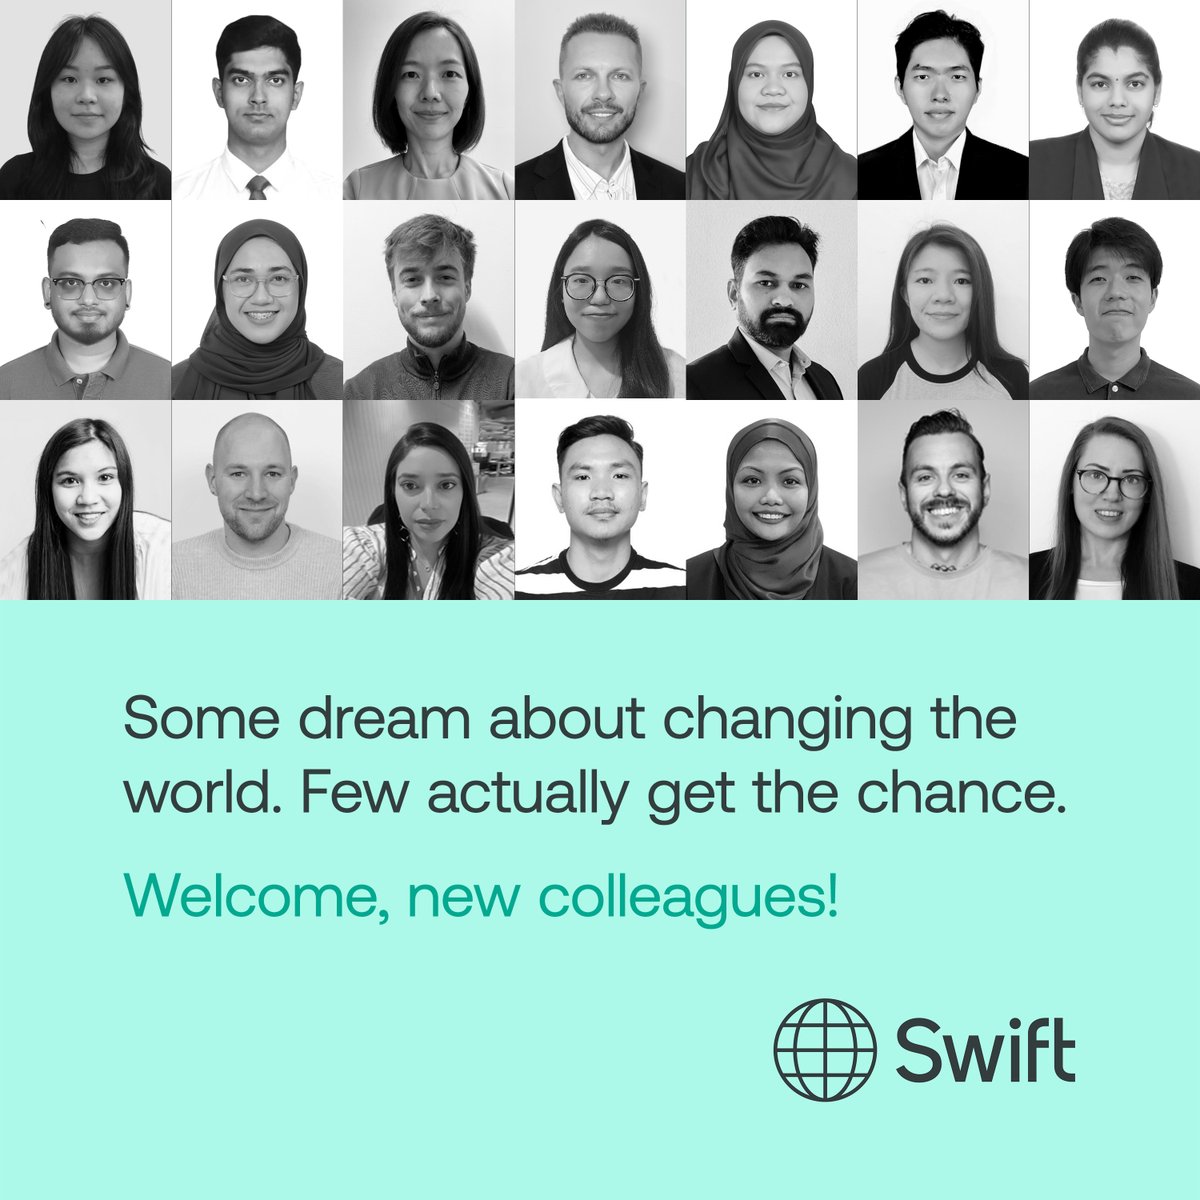 From Stockholm to Jakarta, Sydney to São Paulo, our team is expanding worldwide! 🌍🙋‍♀️

Think you’ve got what it takes to shape the future of finance? Explore our open positions today. 👉swift.com/about-us/caree…

#hiring #recruiting #jobsearch #career #jobopening #jobopportunities